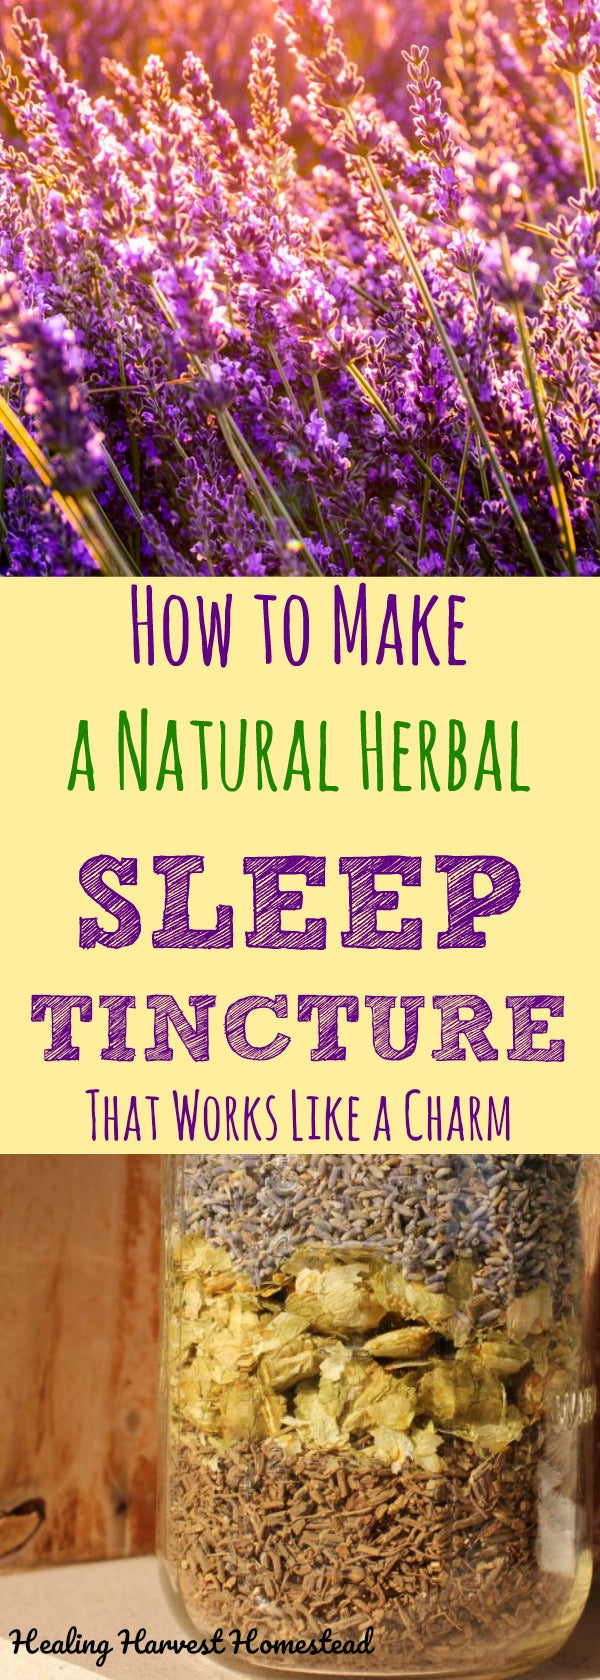 Make Your Own Effective Sleep Aid from Safe Easy to Find Herbs!